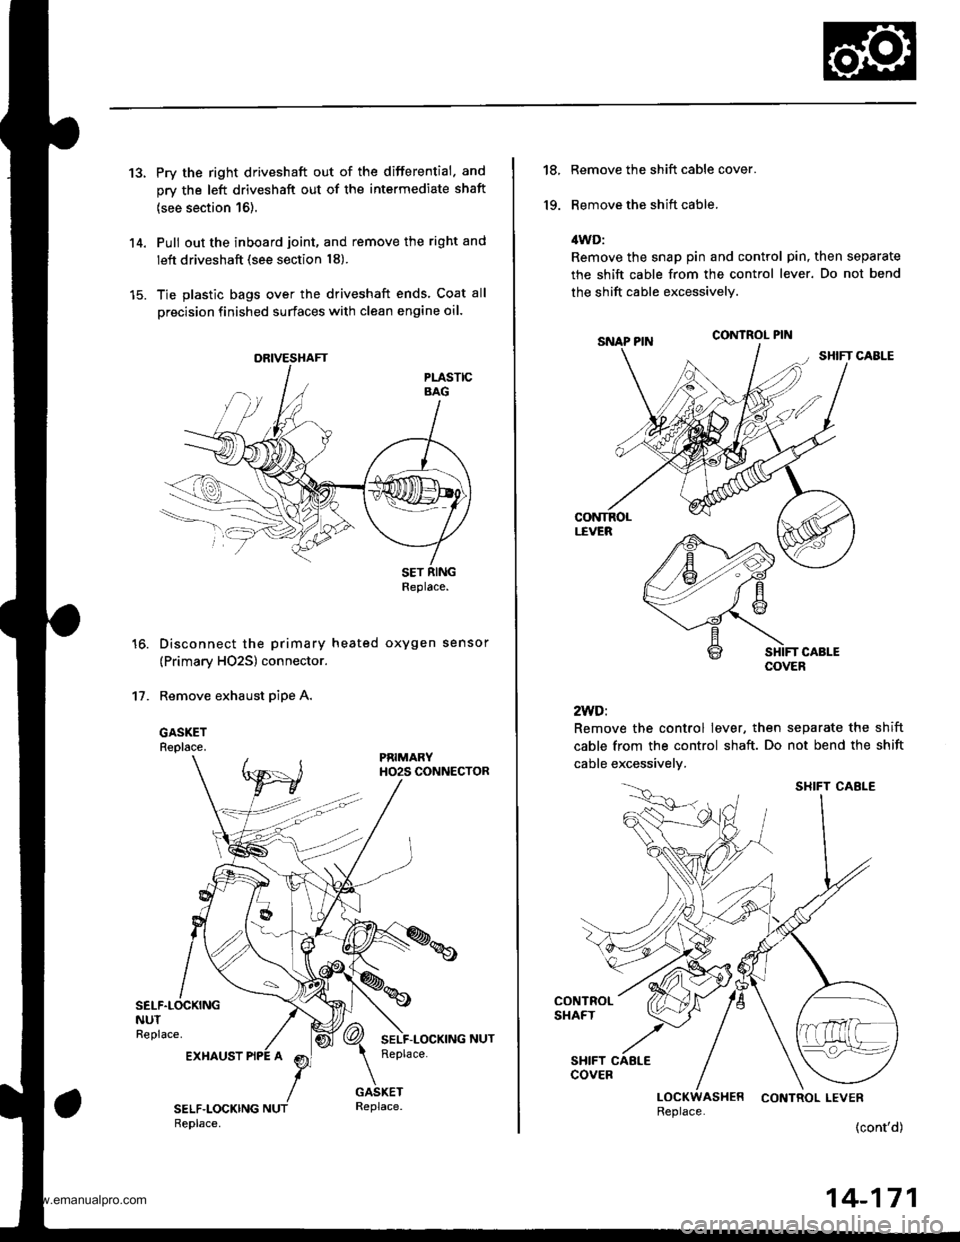 HONDA CR-V 2000 RD1-RD3 / 1.G Service Manual 
13.Pry the right driveshaft out of the differential. and
orv the left driveshaft out of the intermediate shaft
{see section 16).
Pull out the inboard joint, and remove the right and
left driveshaft (